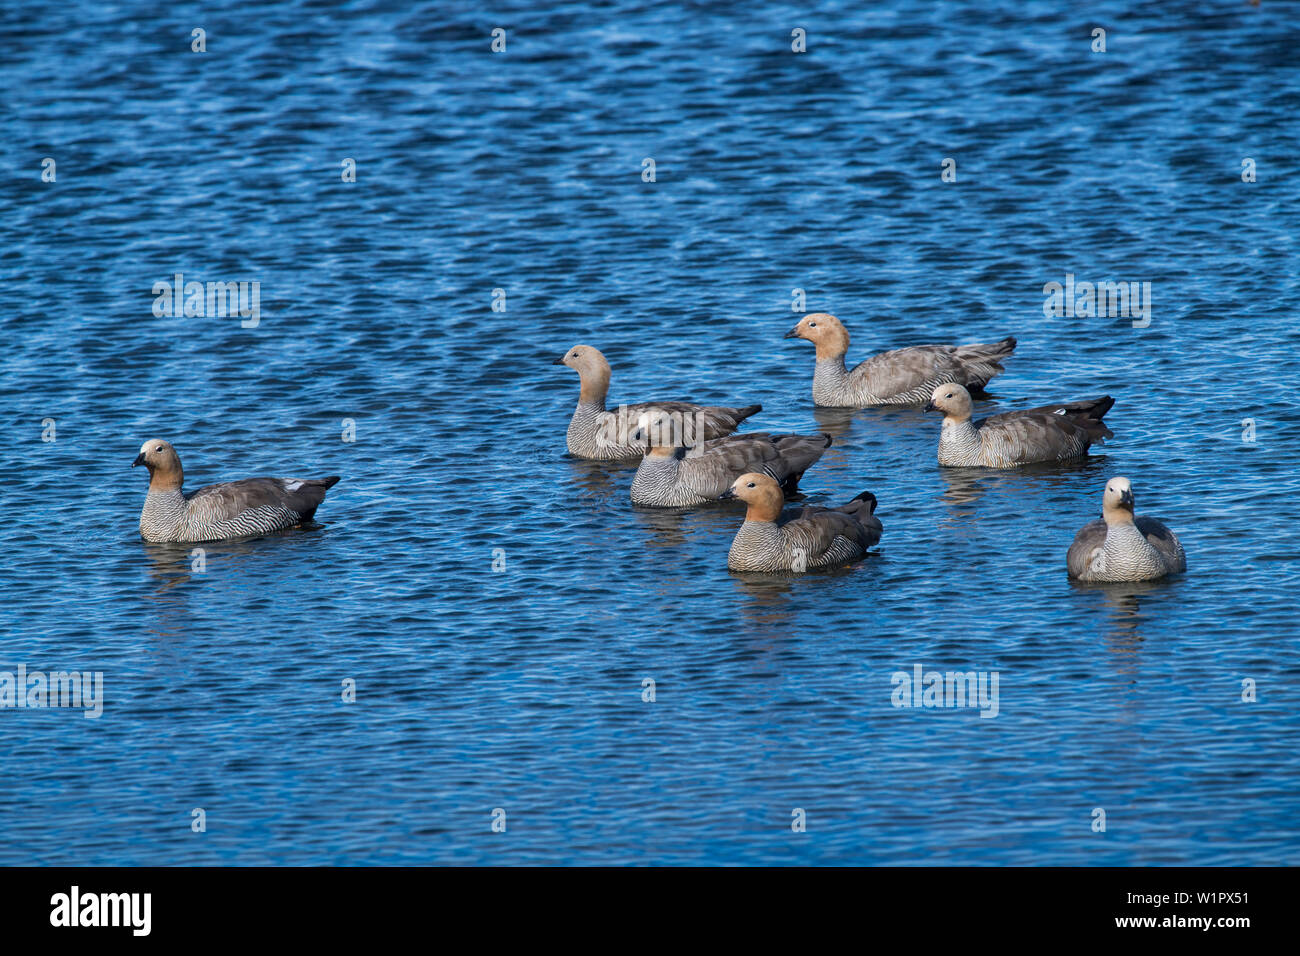 Seven female upland geese, also known as Magellan Geese (Chloephaga picta), swim in deep blue water, Westpoint Island, Falkland Islands, British Overs Stock Photo